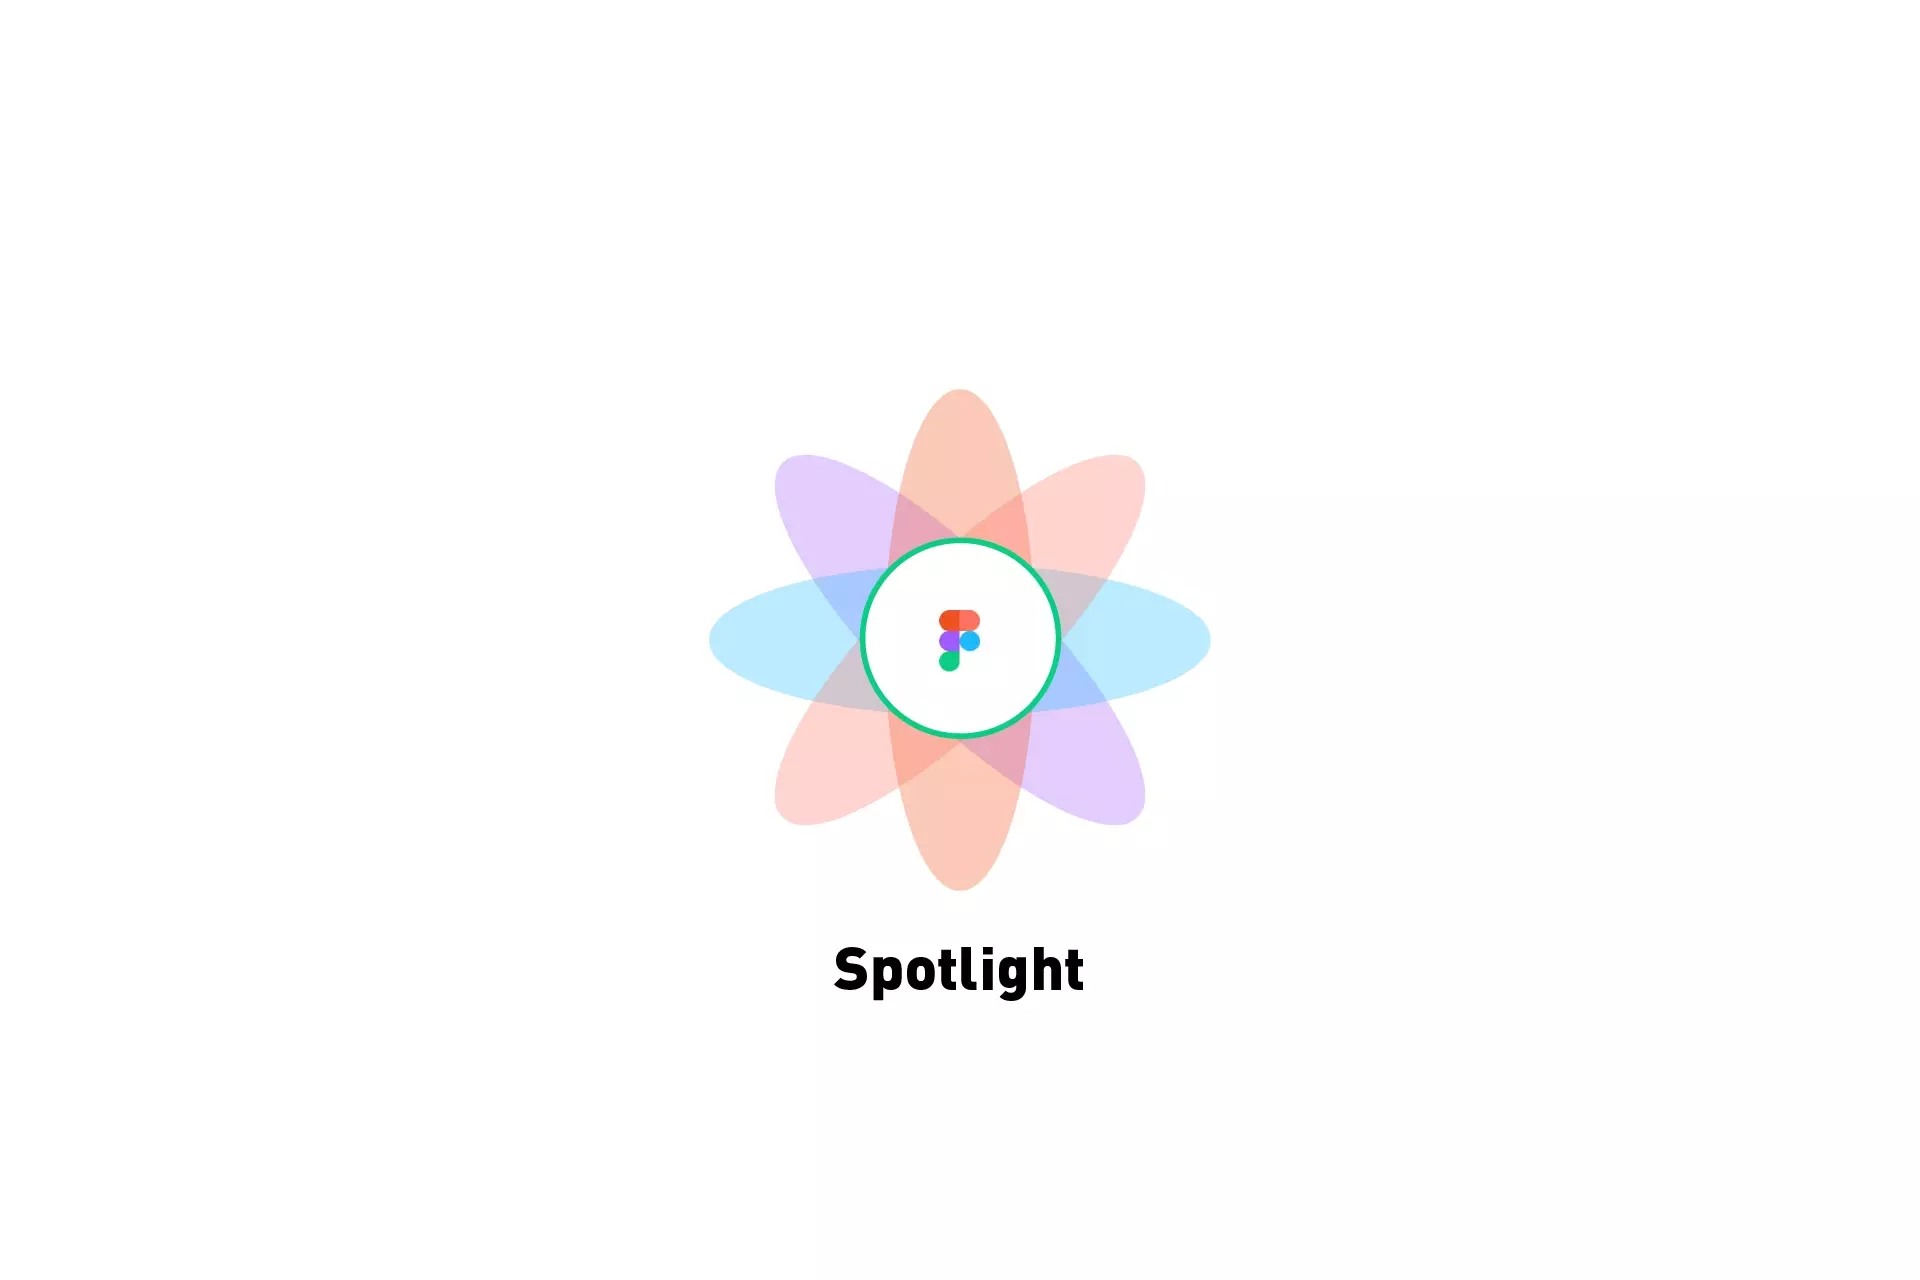 A flower that represents Figma with the text "Spotlight" beneath it.